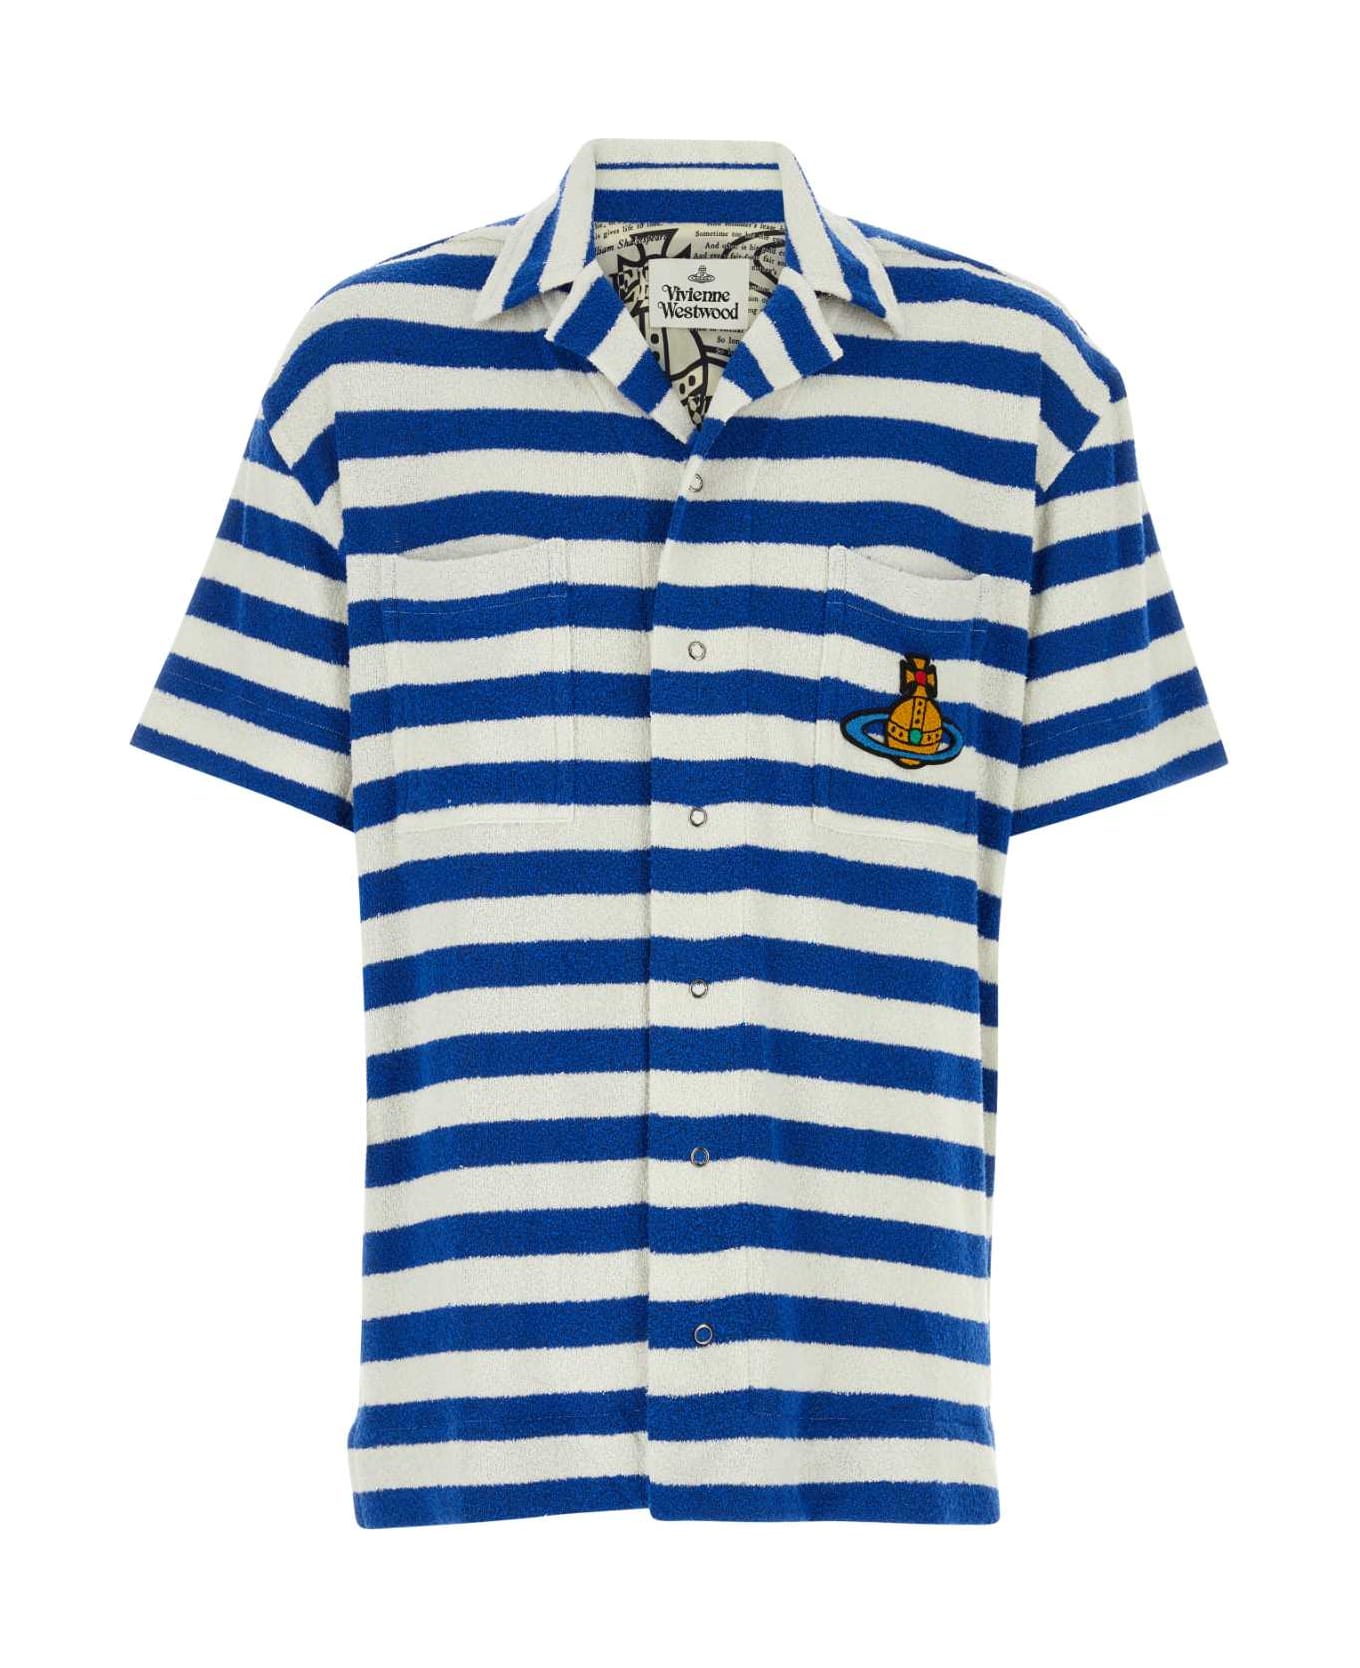 Vivienne Westwood Embroidered Terry Fabric Camp Shirt - WHITEBLUE